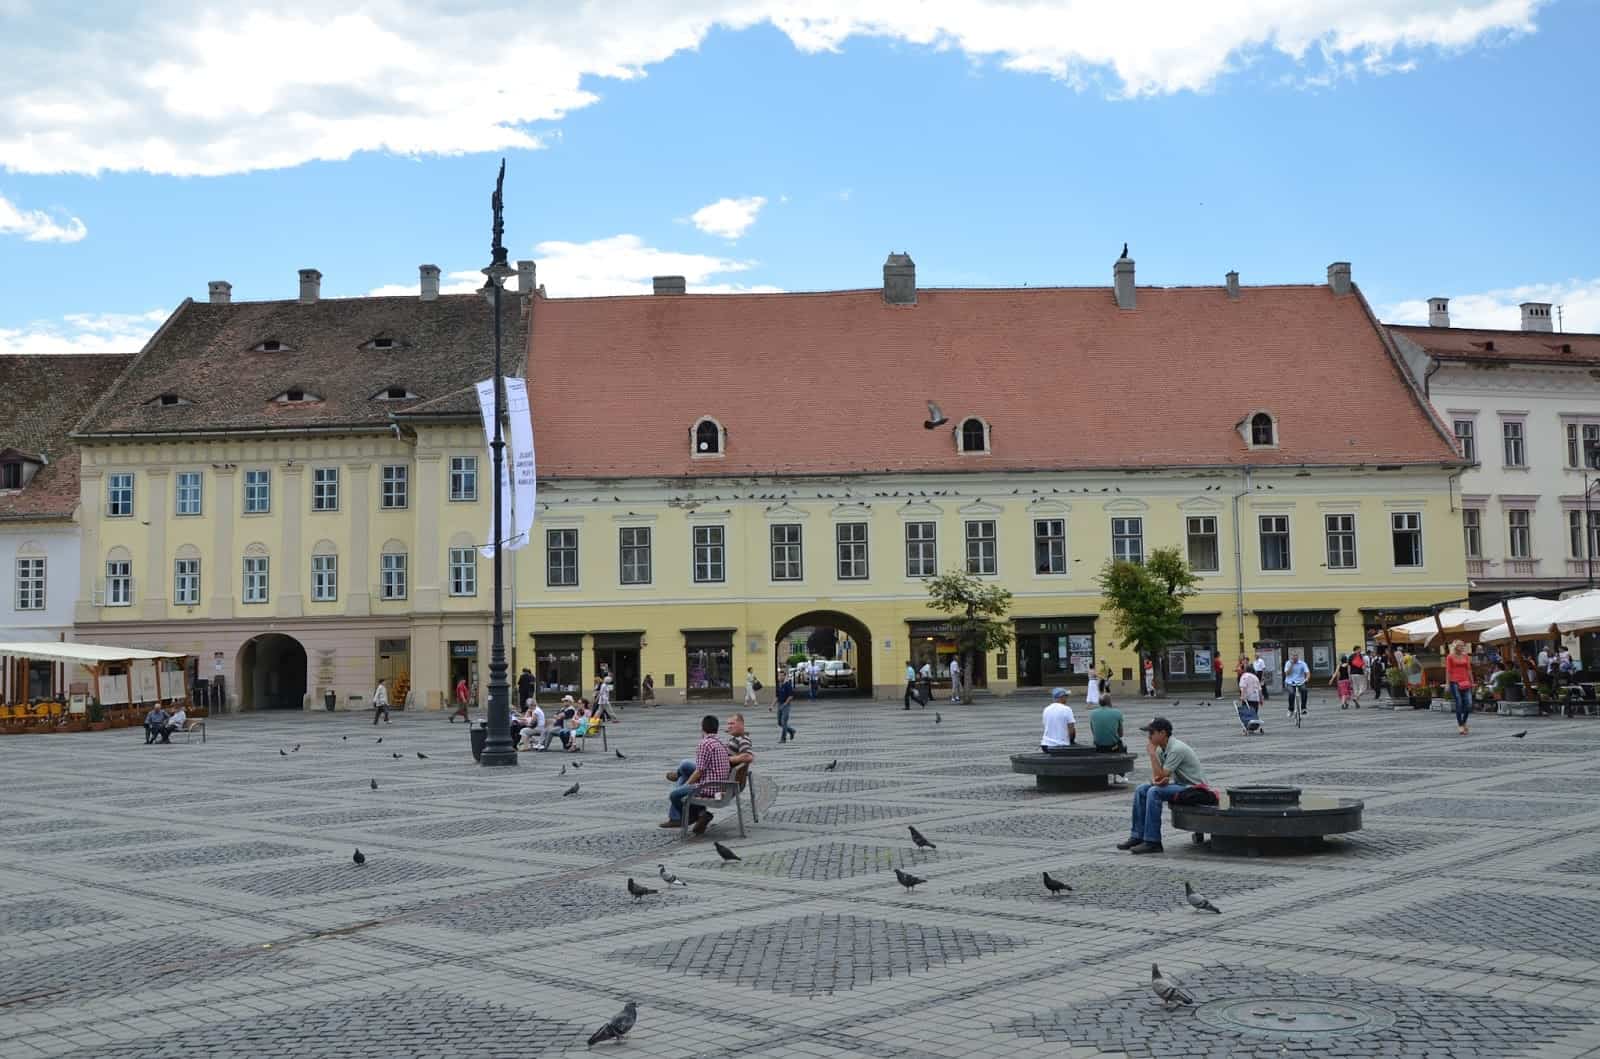 Hecht House (left) and General’s House (right) in Sibiu, Romania